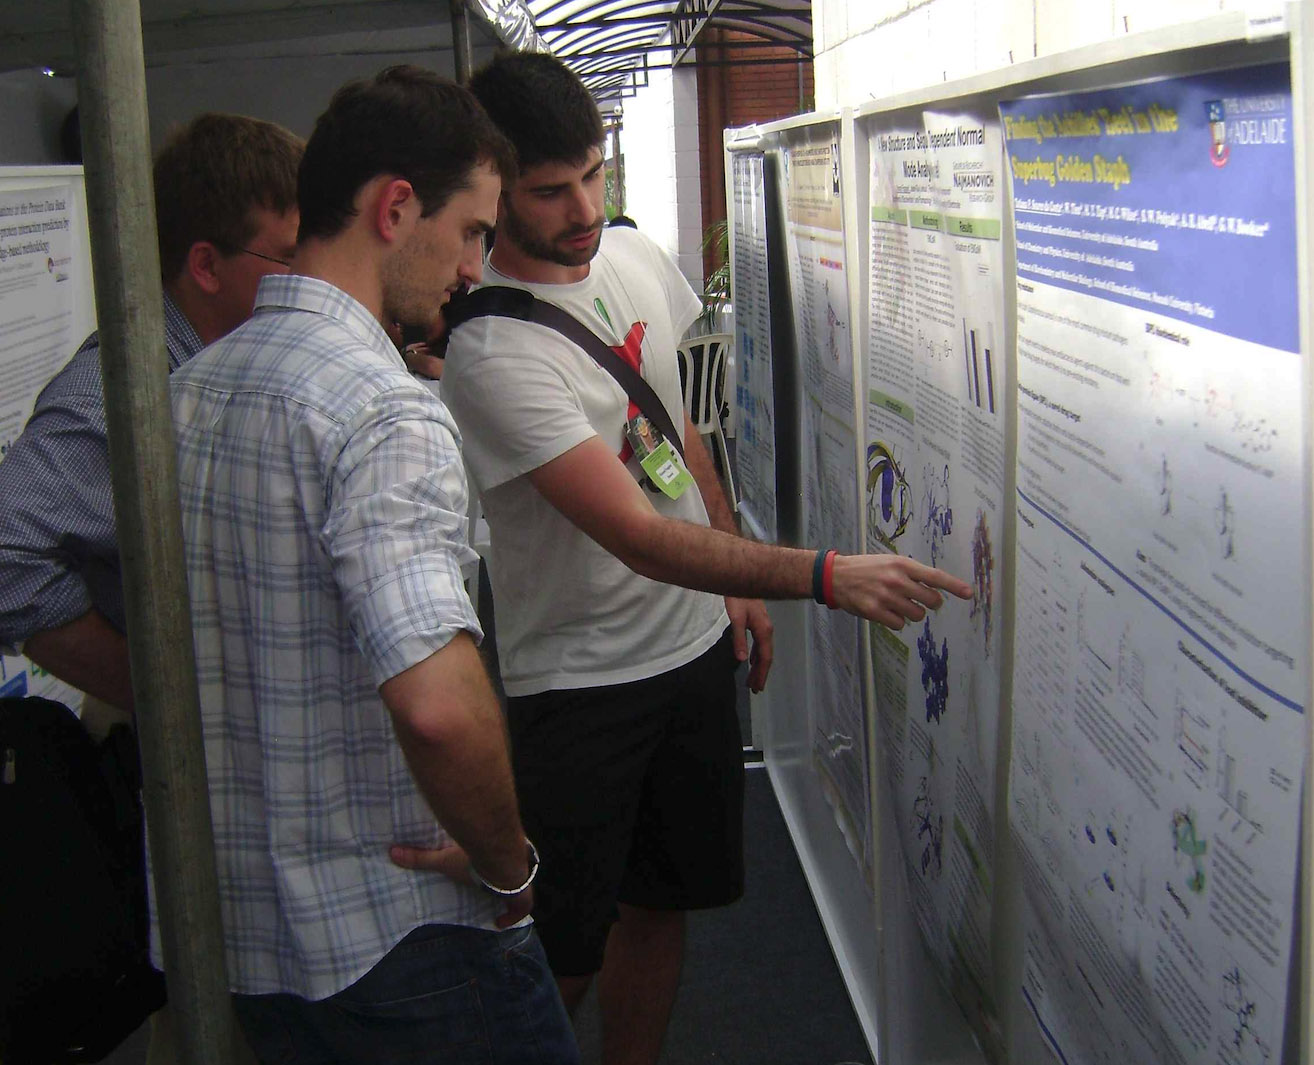 Presenter showing his poster